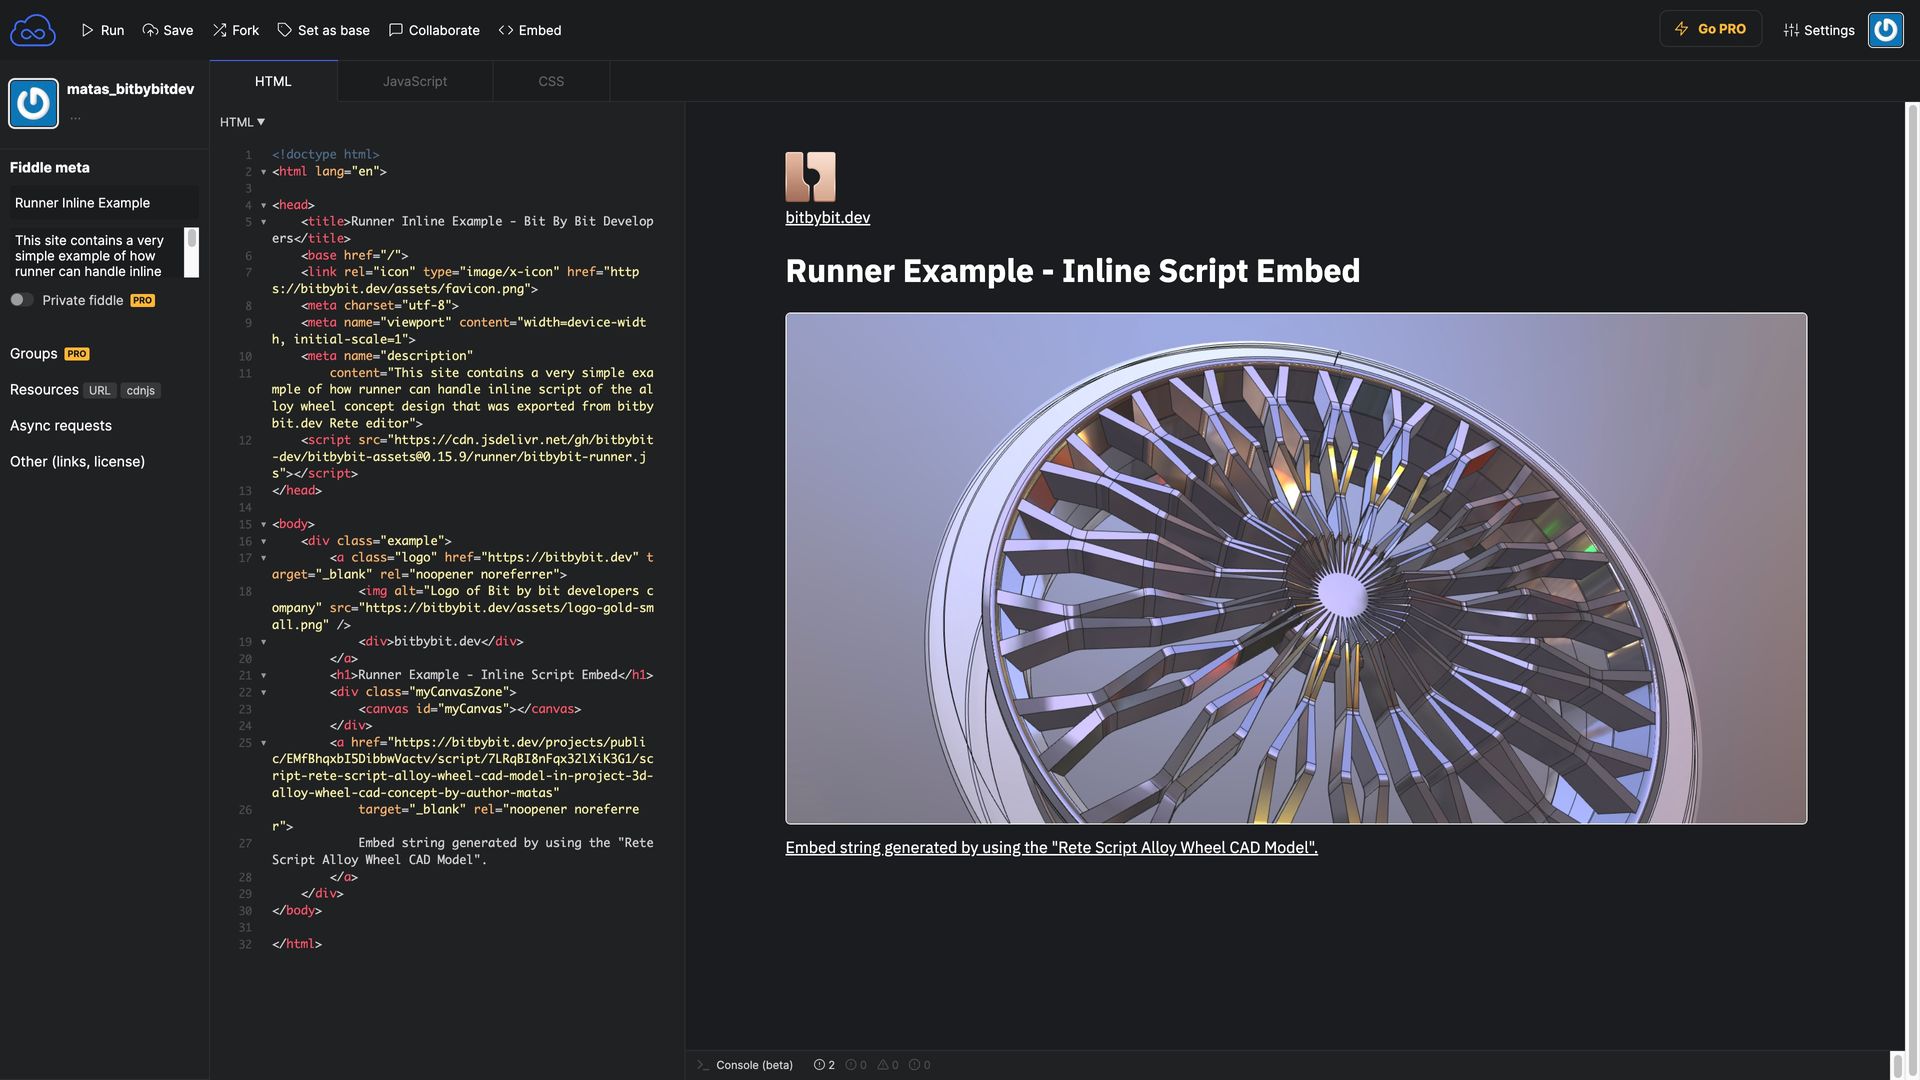 The image showing JSFiddle code editor with produced output of the alloy wheel.